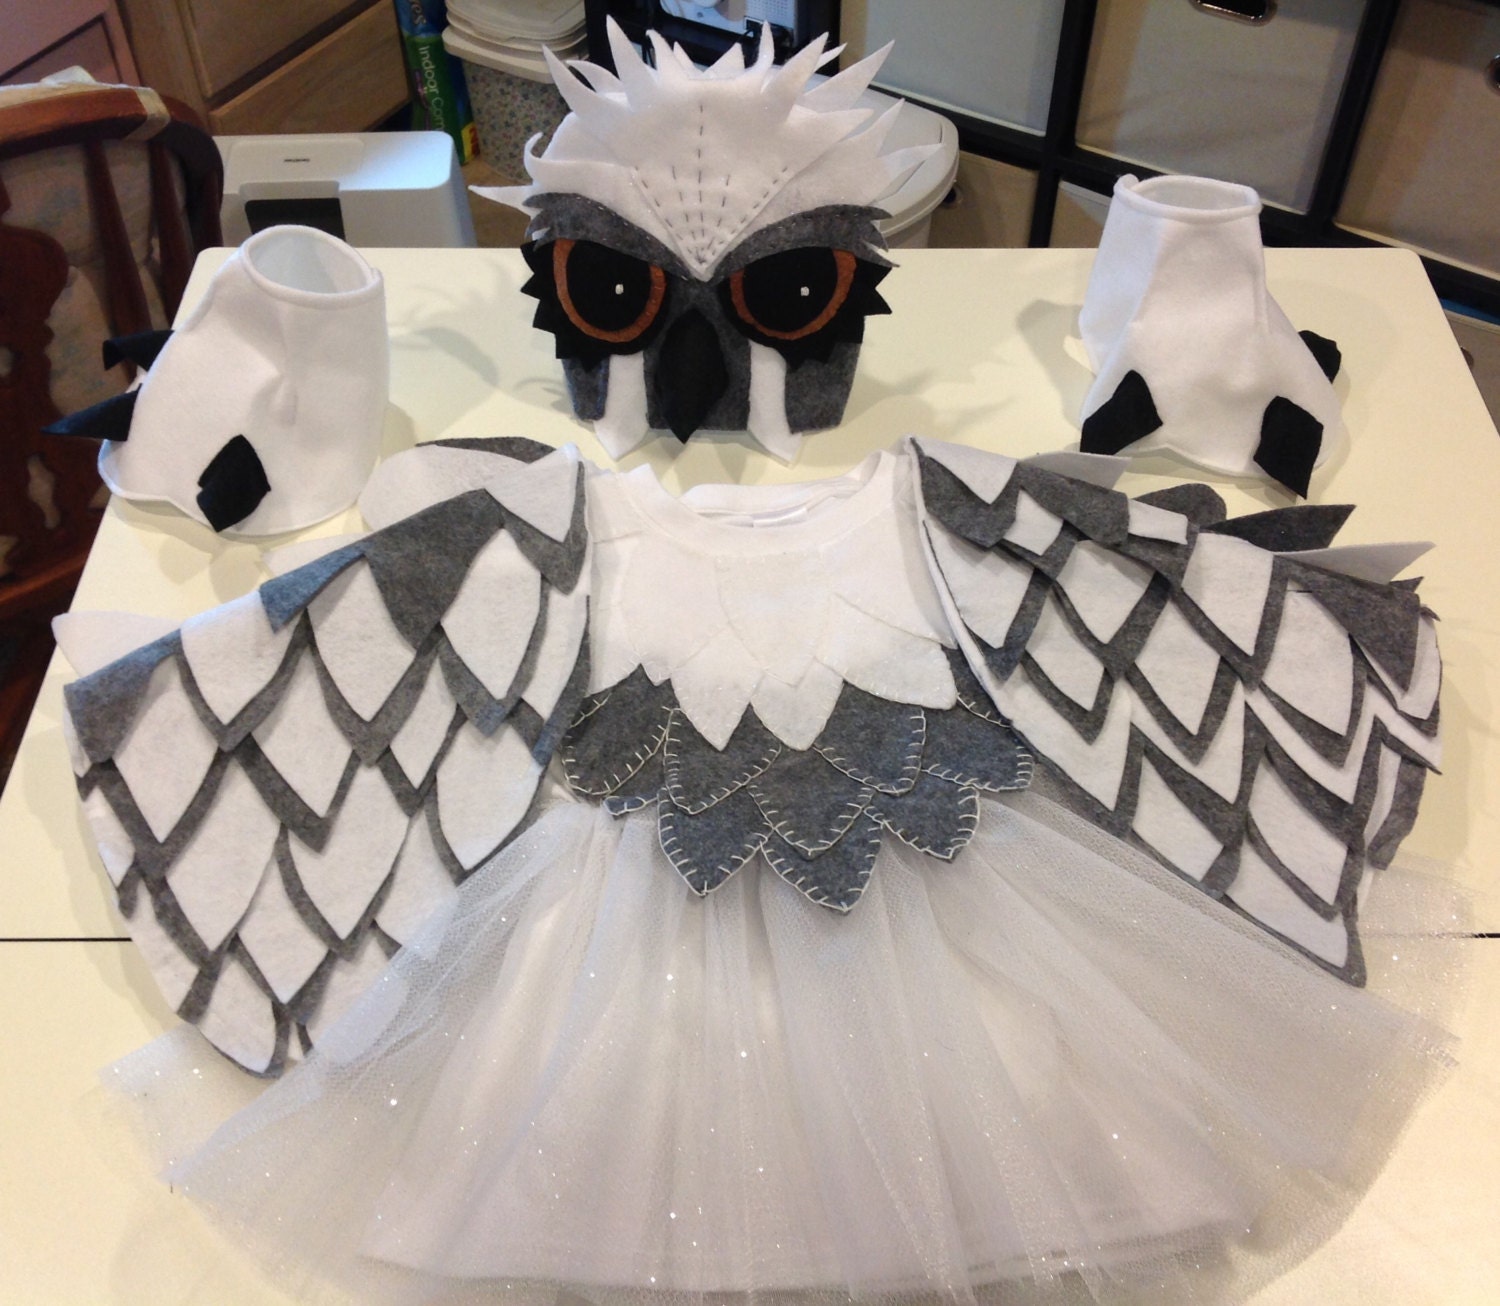 Snow Owl Costume Related Keywords & Suggestions - Snow Owl C